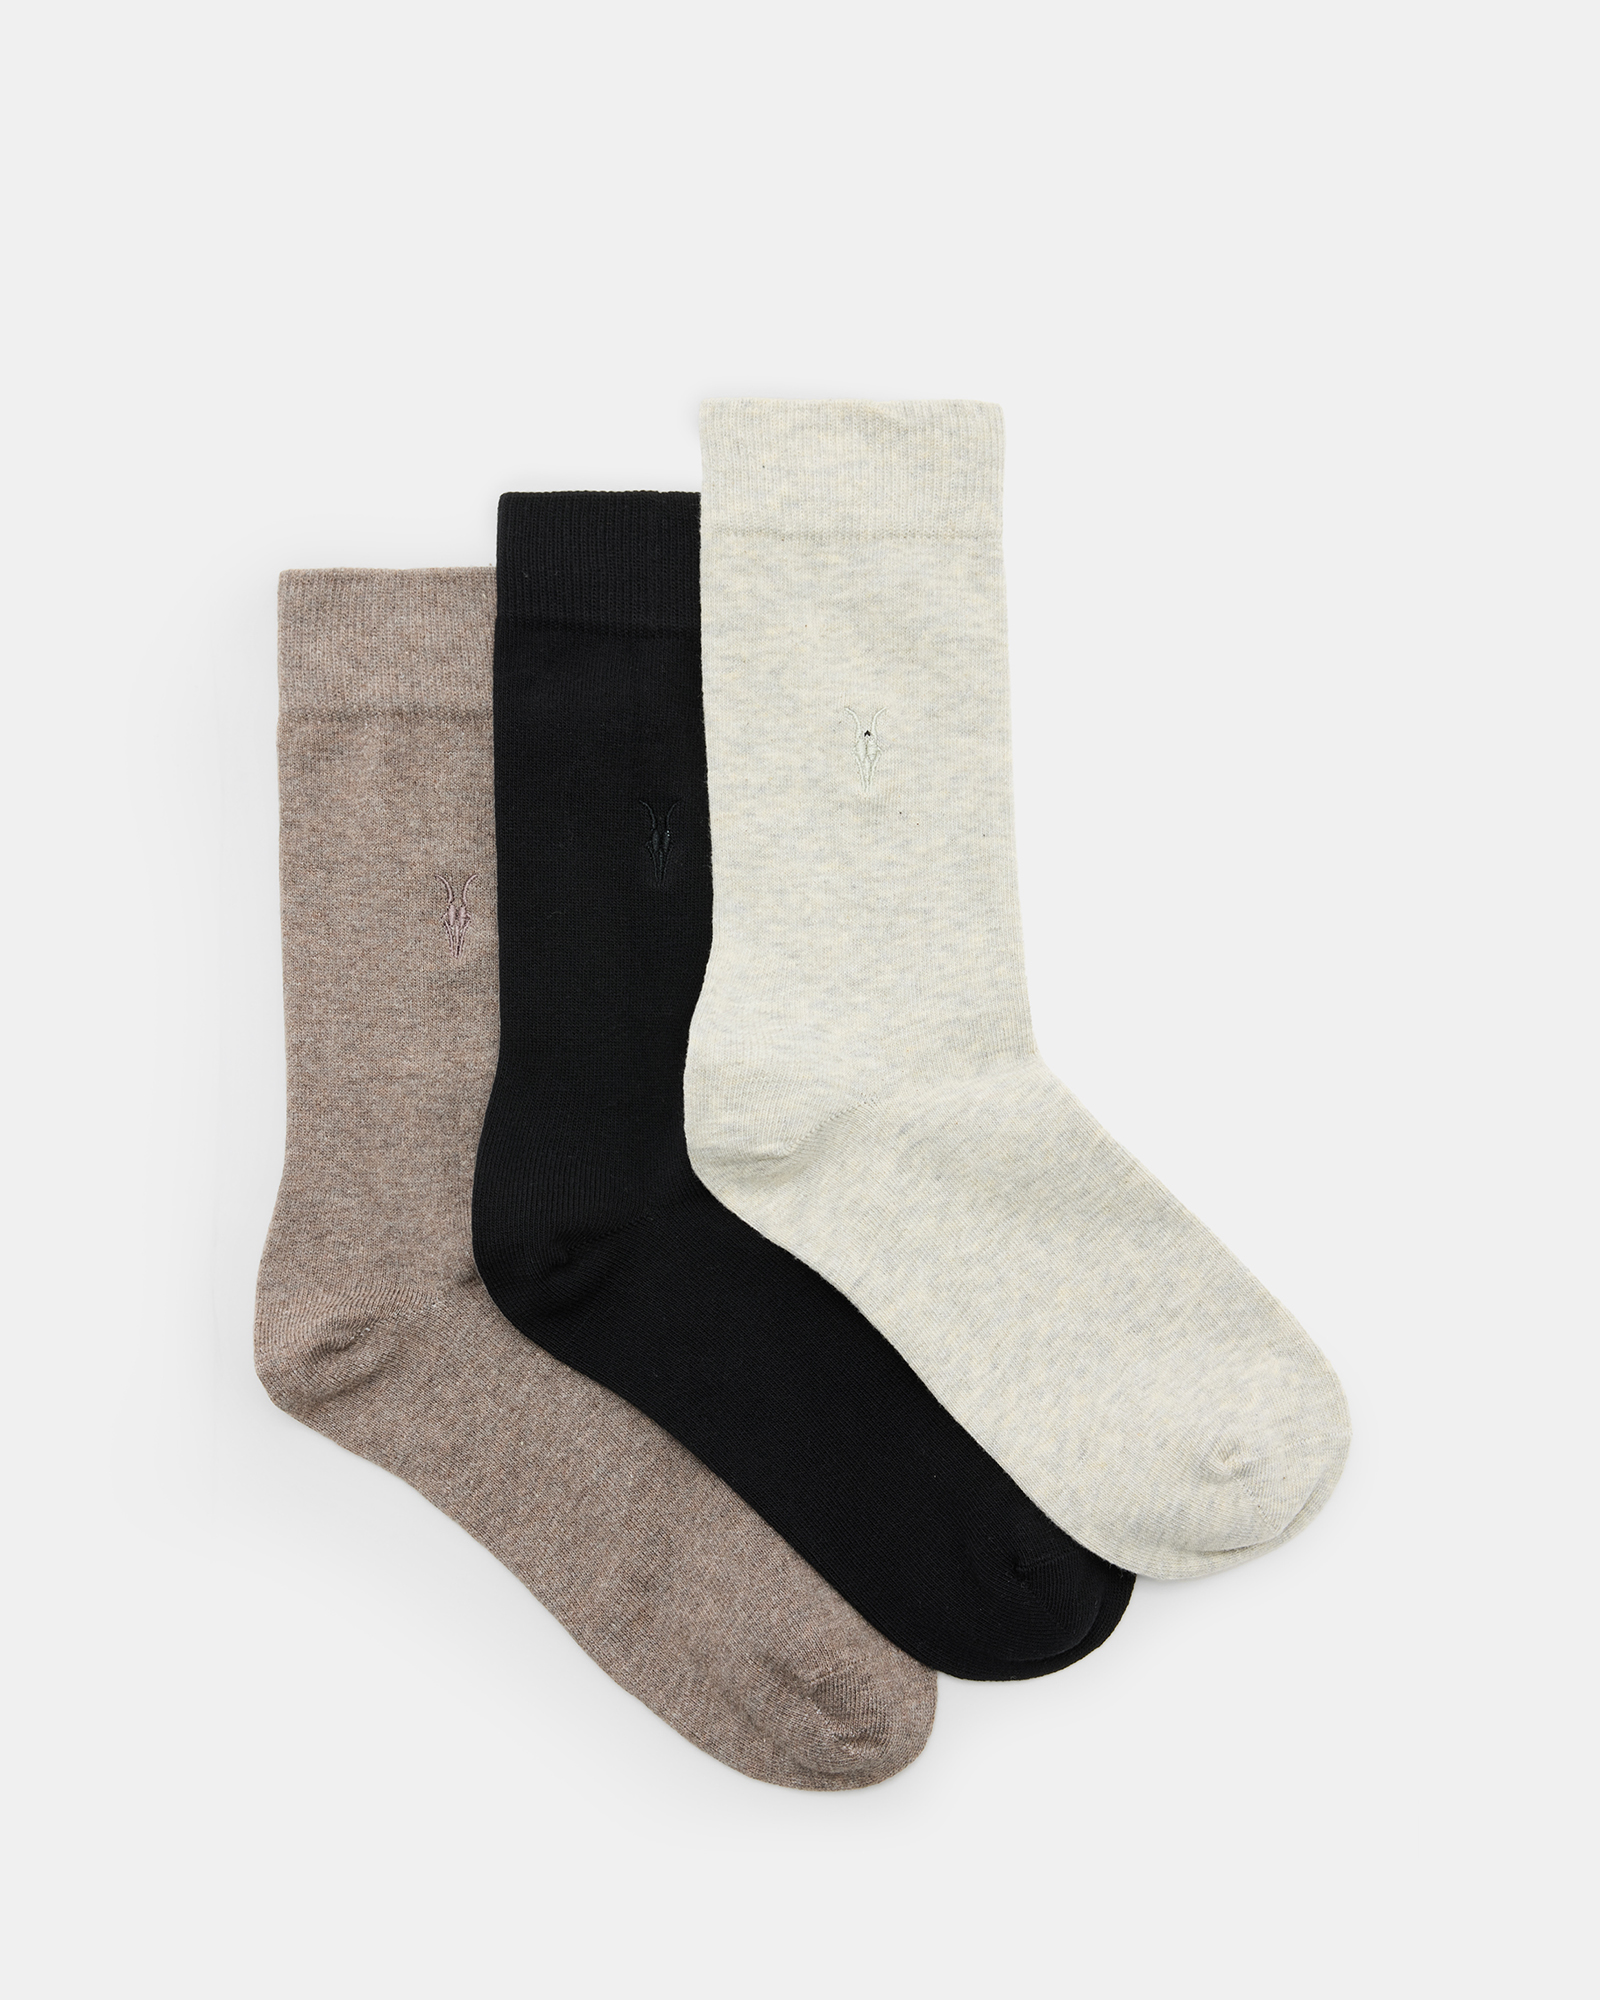 AllSaints Adan Ramskull Embroidered Socks 3 Pack,, TINTED GRY/TUP/BLK